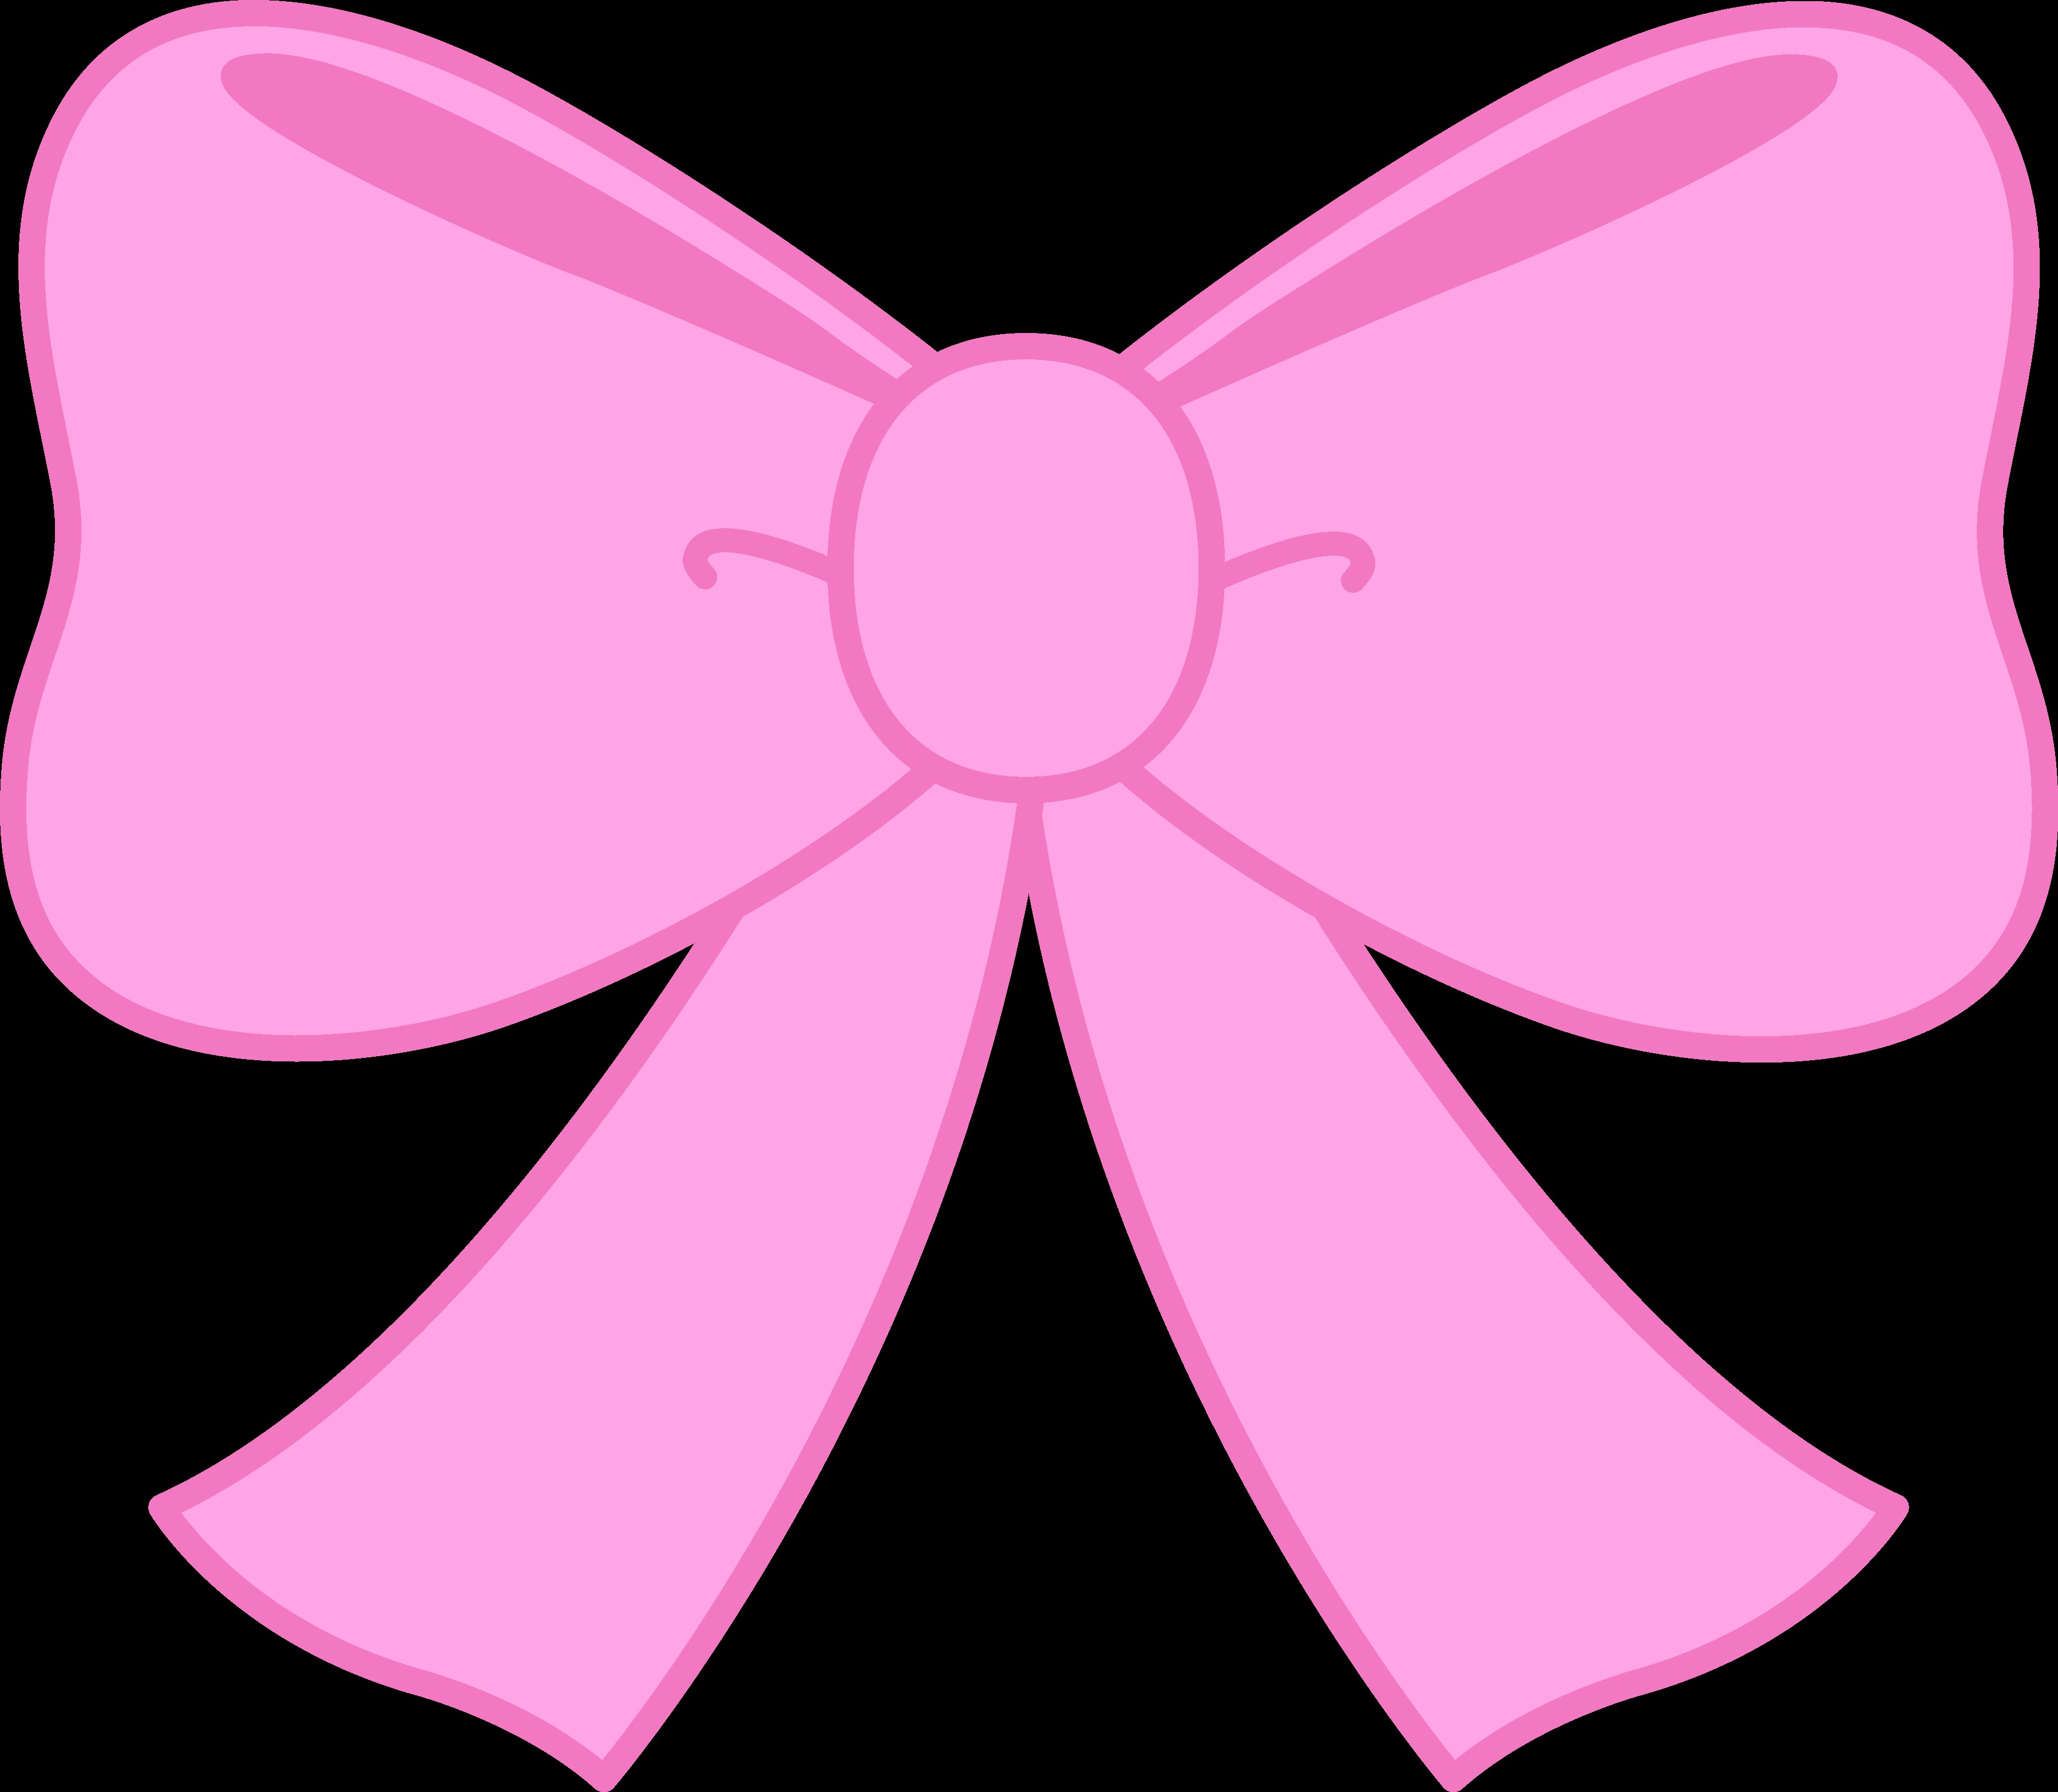 Bow clipart clipart cliparts  - Bow Images Clip Art